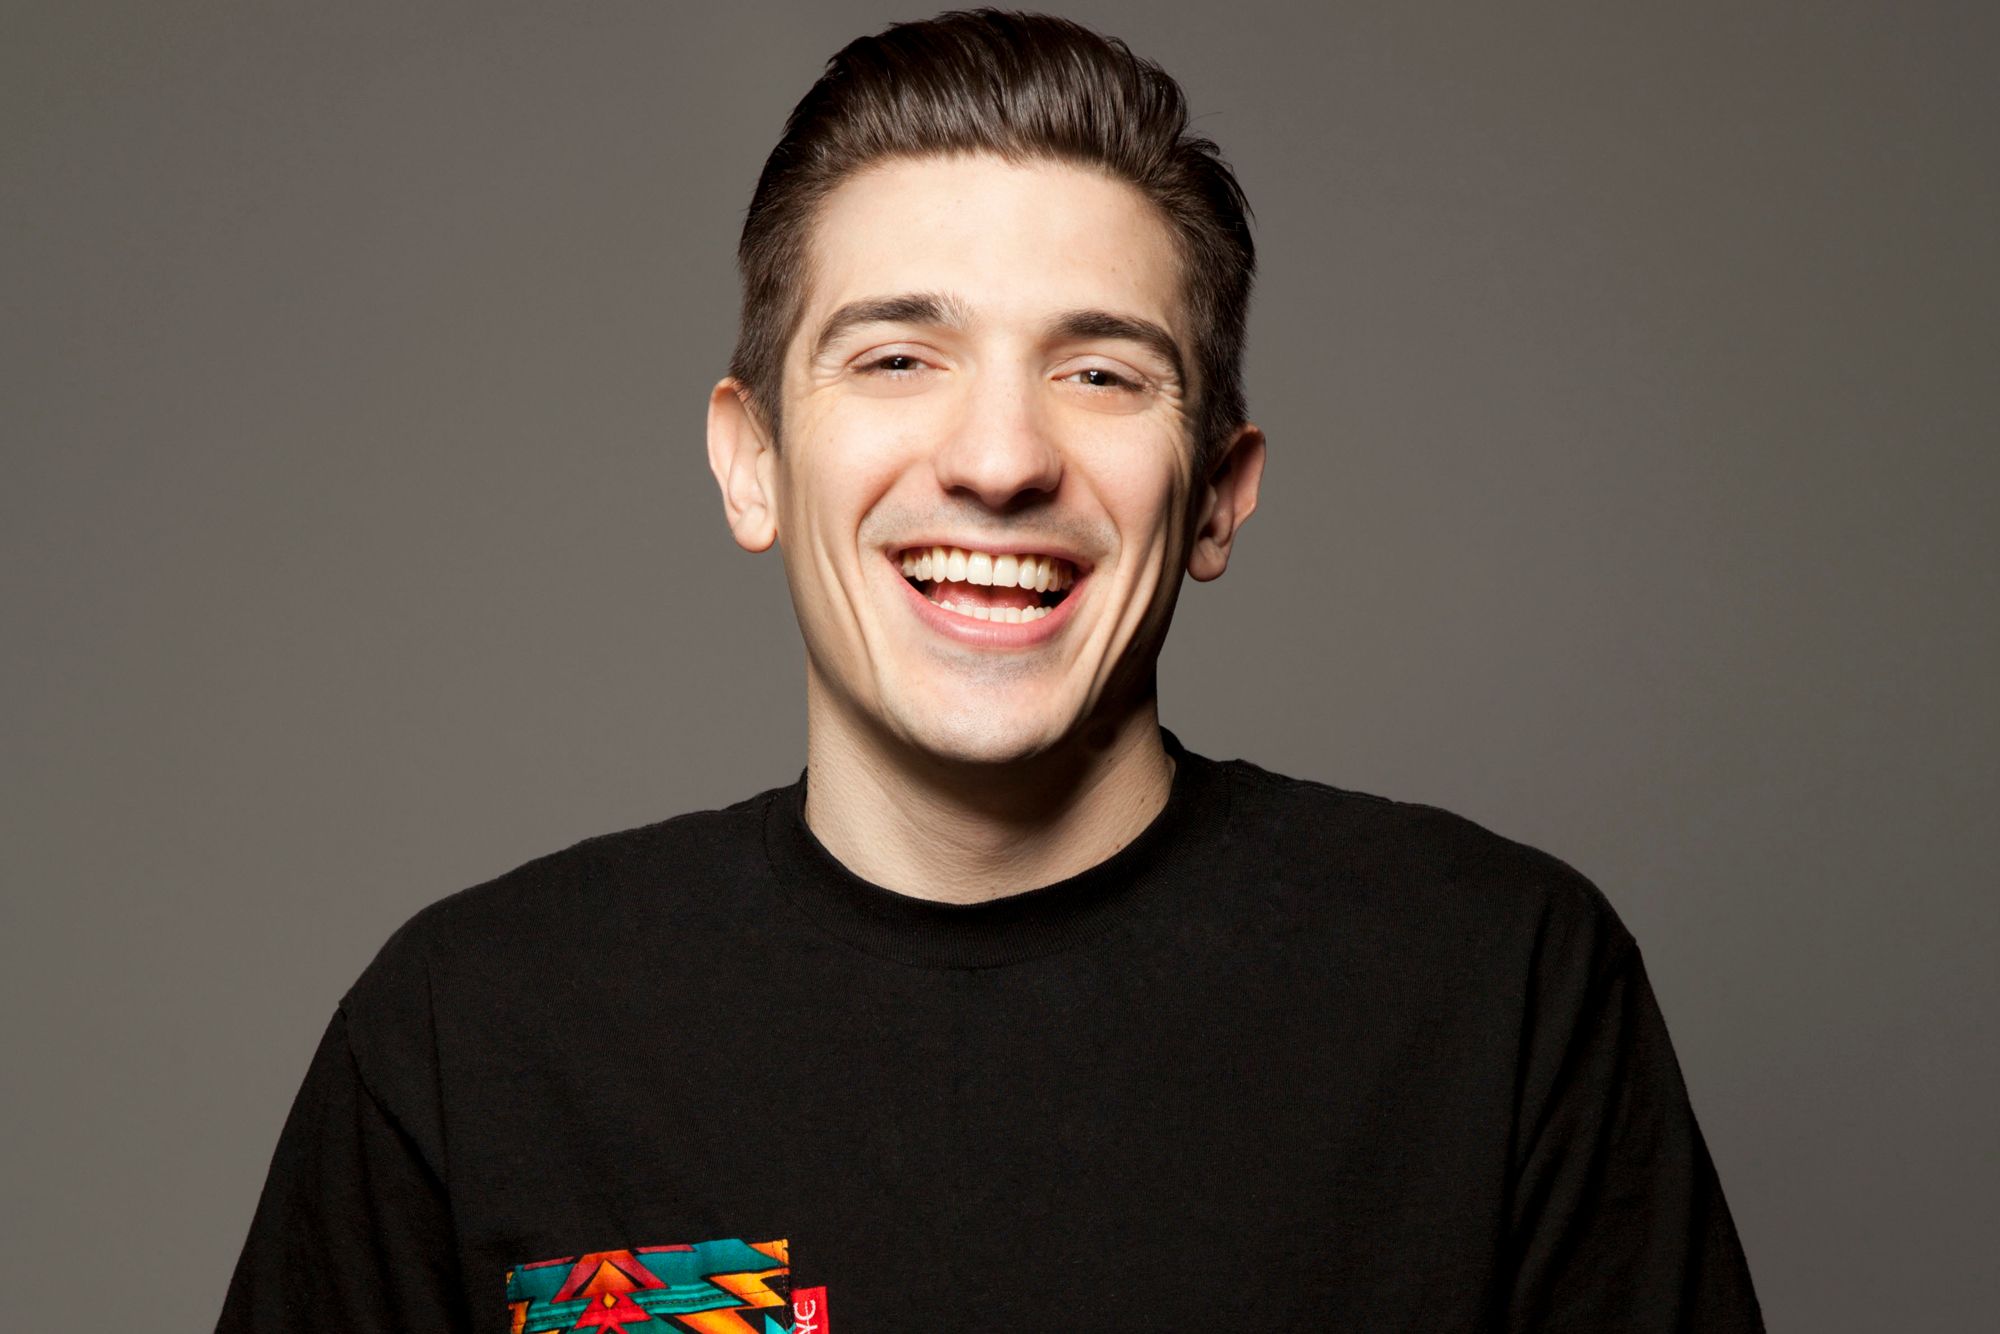 Andrew Schulz - A Great American Comedian Star